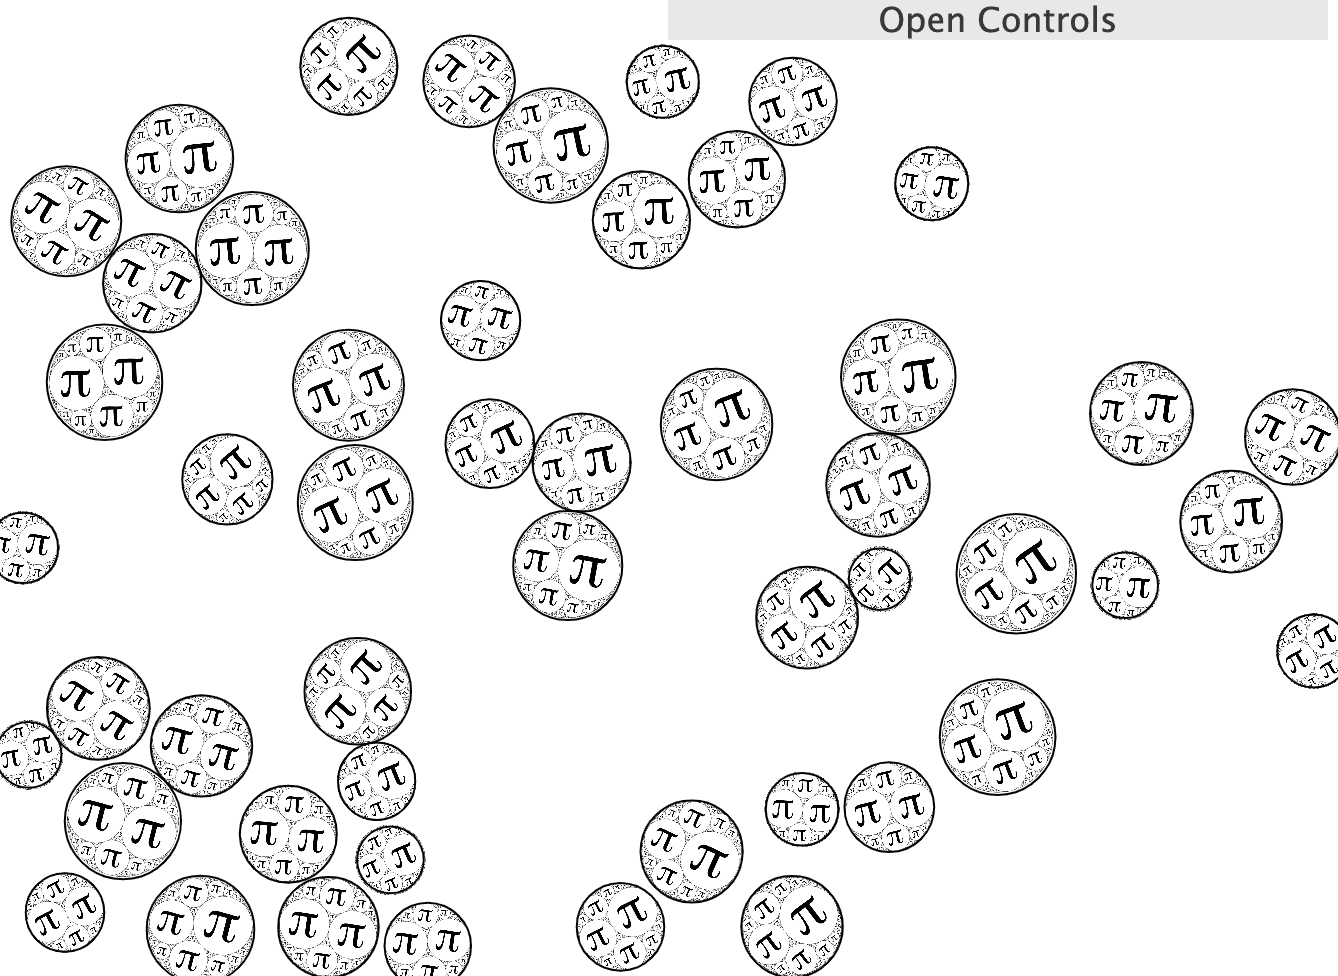 Apollonian gasket collisions